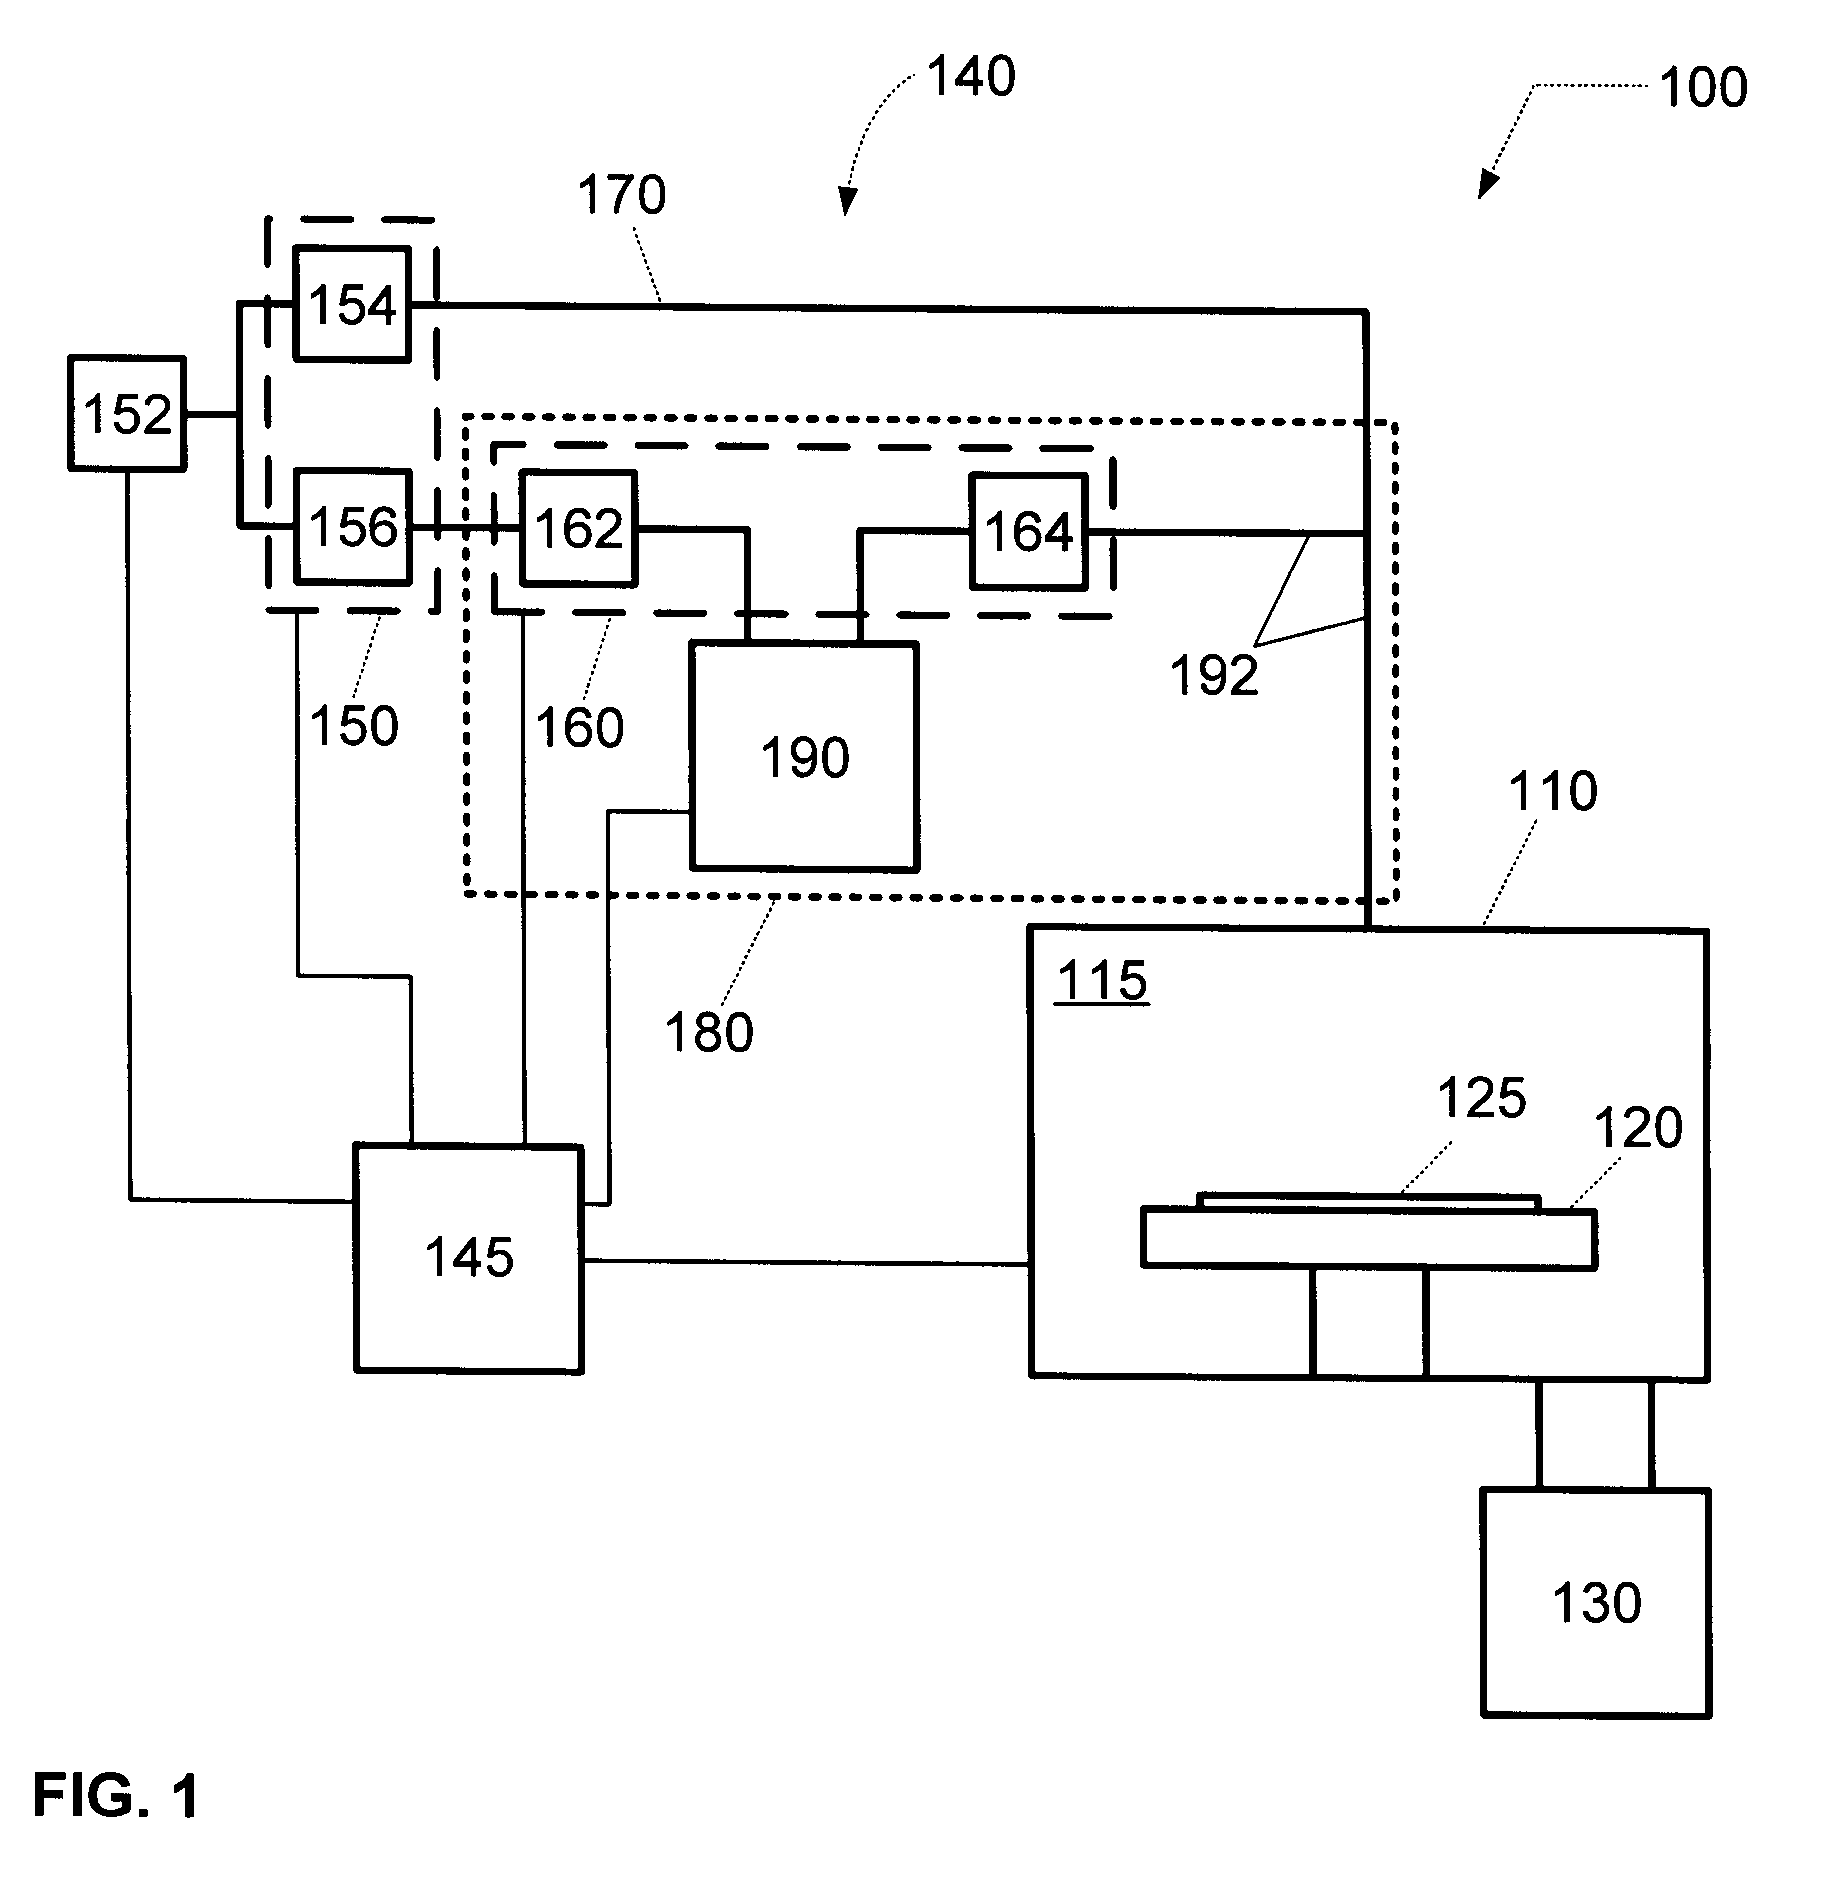 Method and system for controlling a vapor delivery system